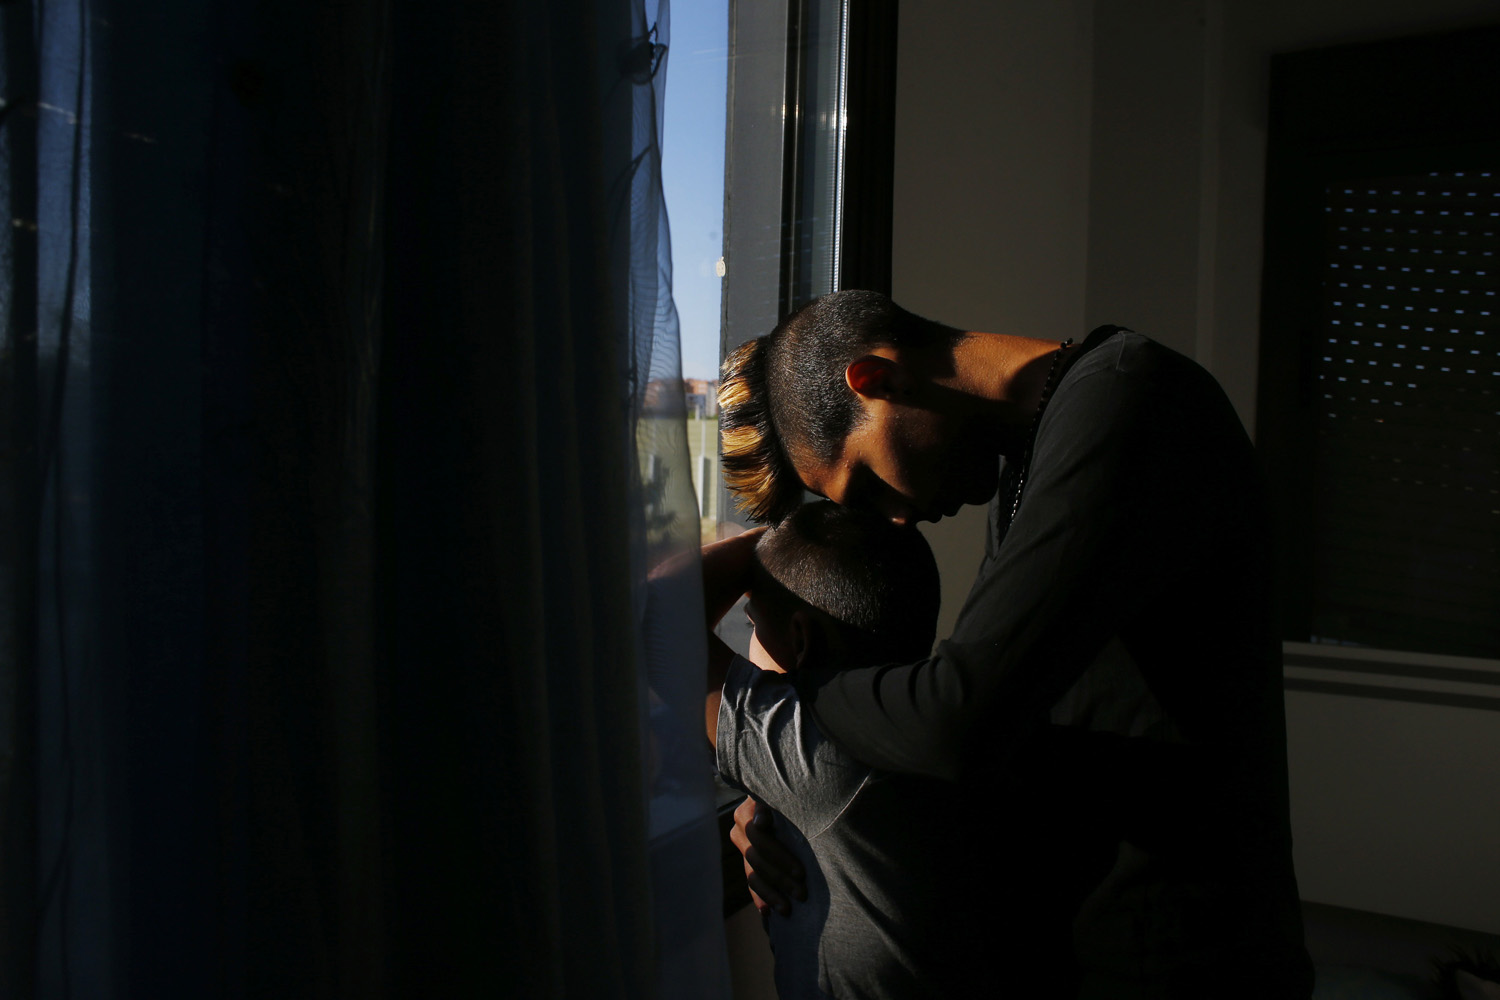 June 4, 2013. Jose Contreras, 16, leans on his younger brother Manuel, 11, as they look out of their window at police officers waiting to carry out their eviction by the Municipal Housing and Land Company (EMVS) in Madrid.